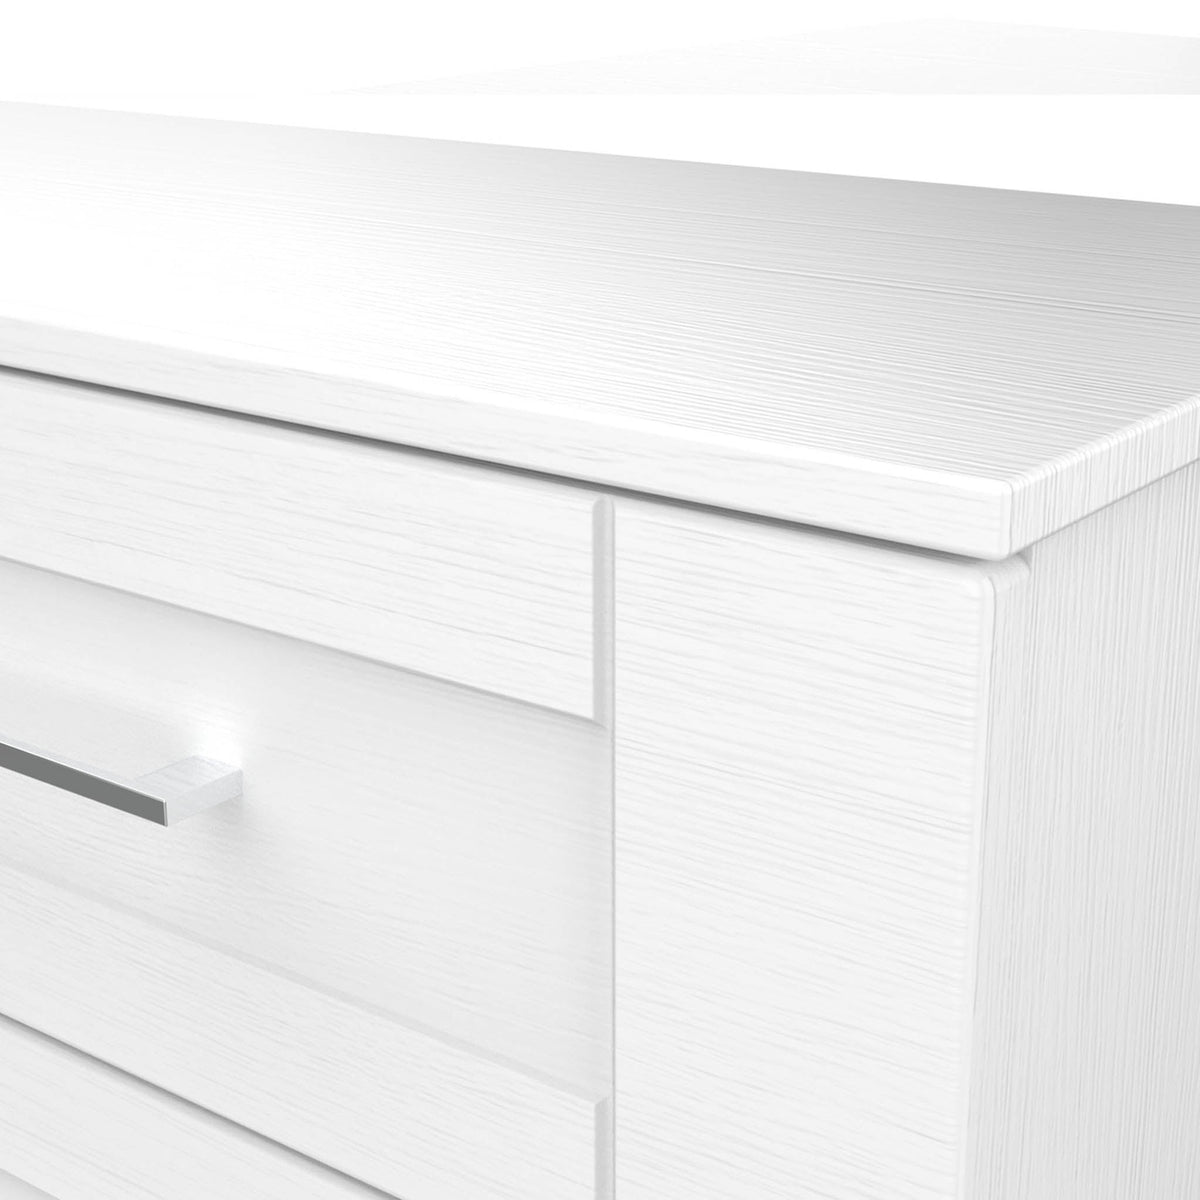 Bellamy White 4 Drawer Deep Storage Chest for Bedroom wood grain close up